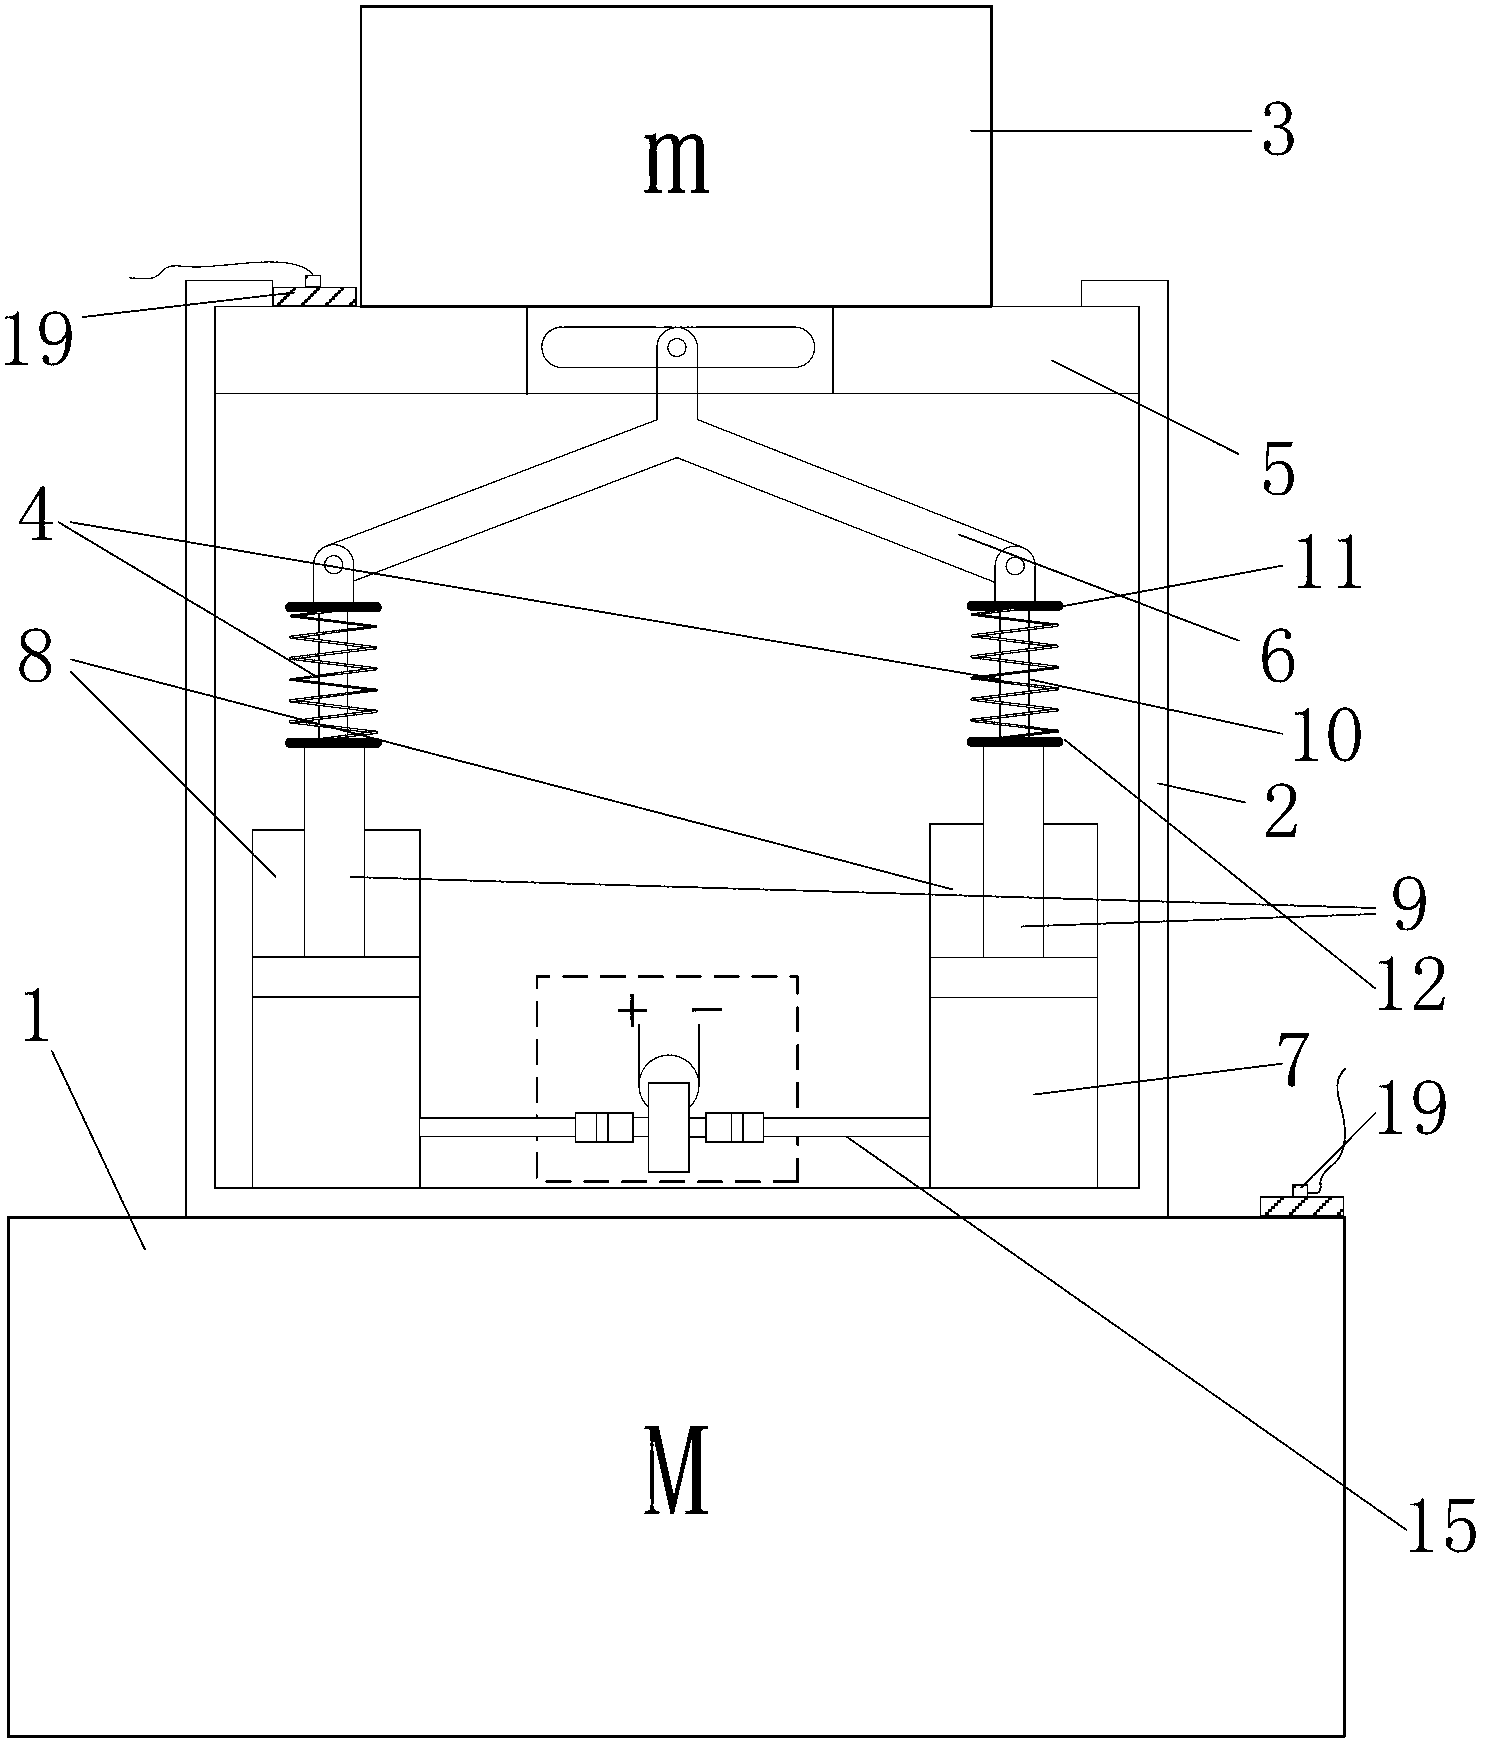 Variable-stiffness variable-damping vibration absorber based on characteristics of magneto-rheological fluid